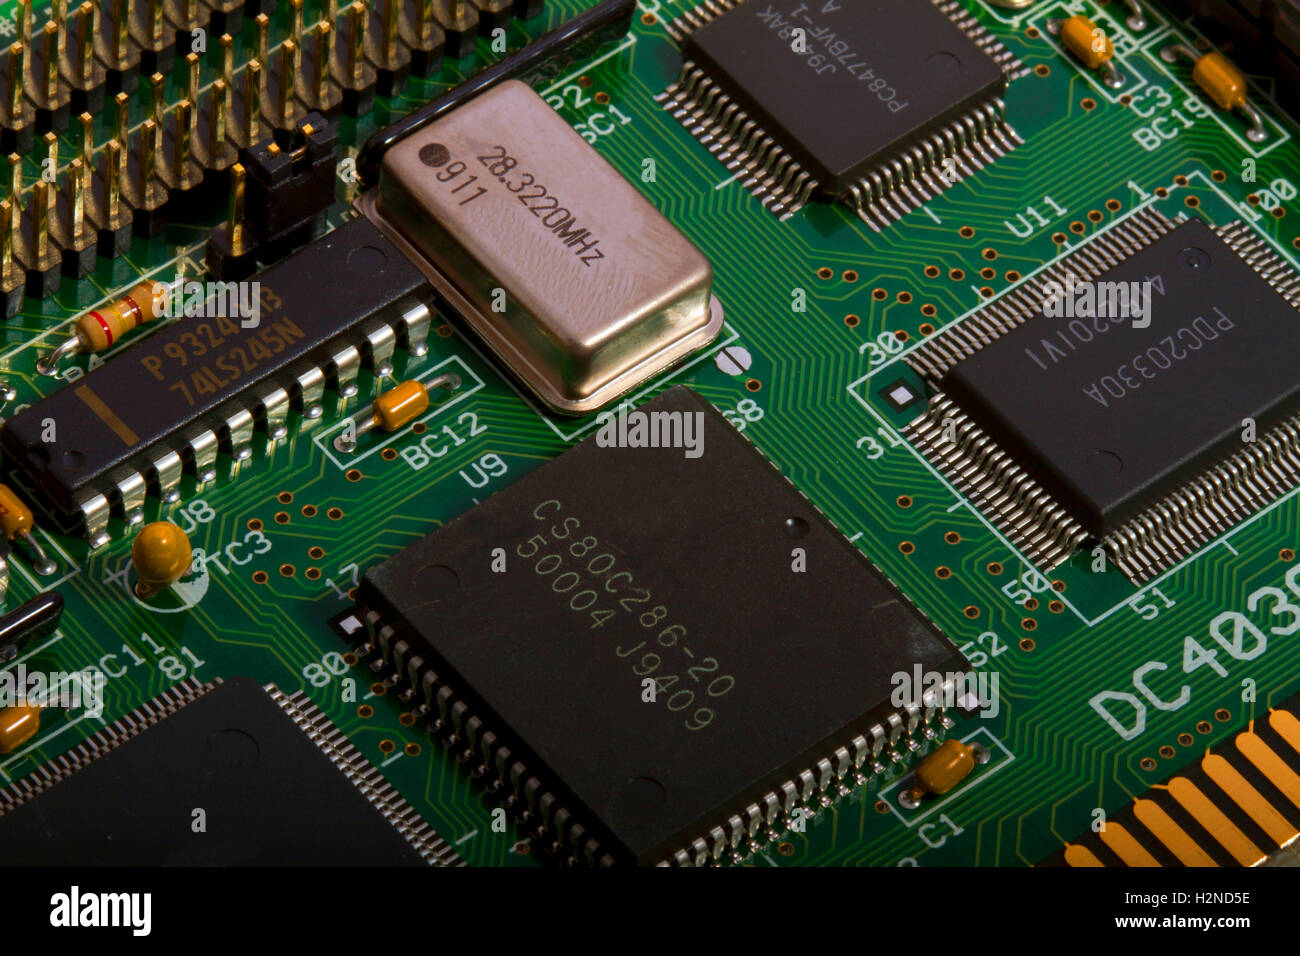 Electronic printed circuit board with components Stock Photo